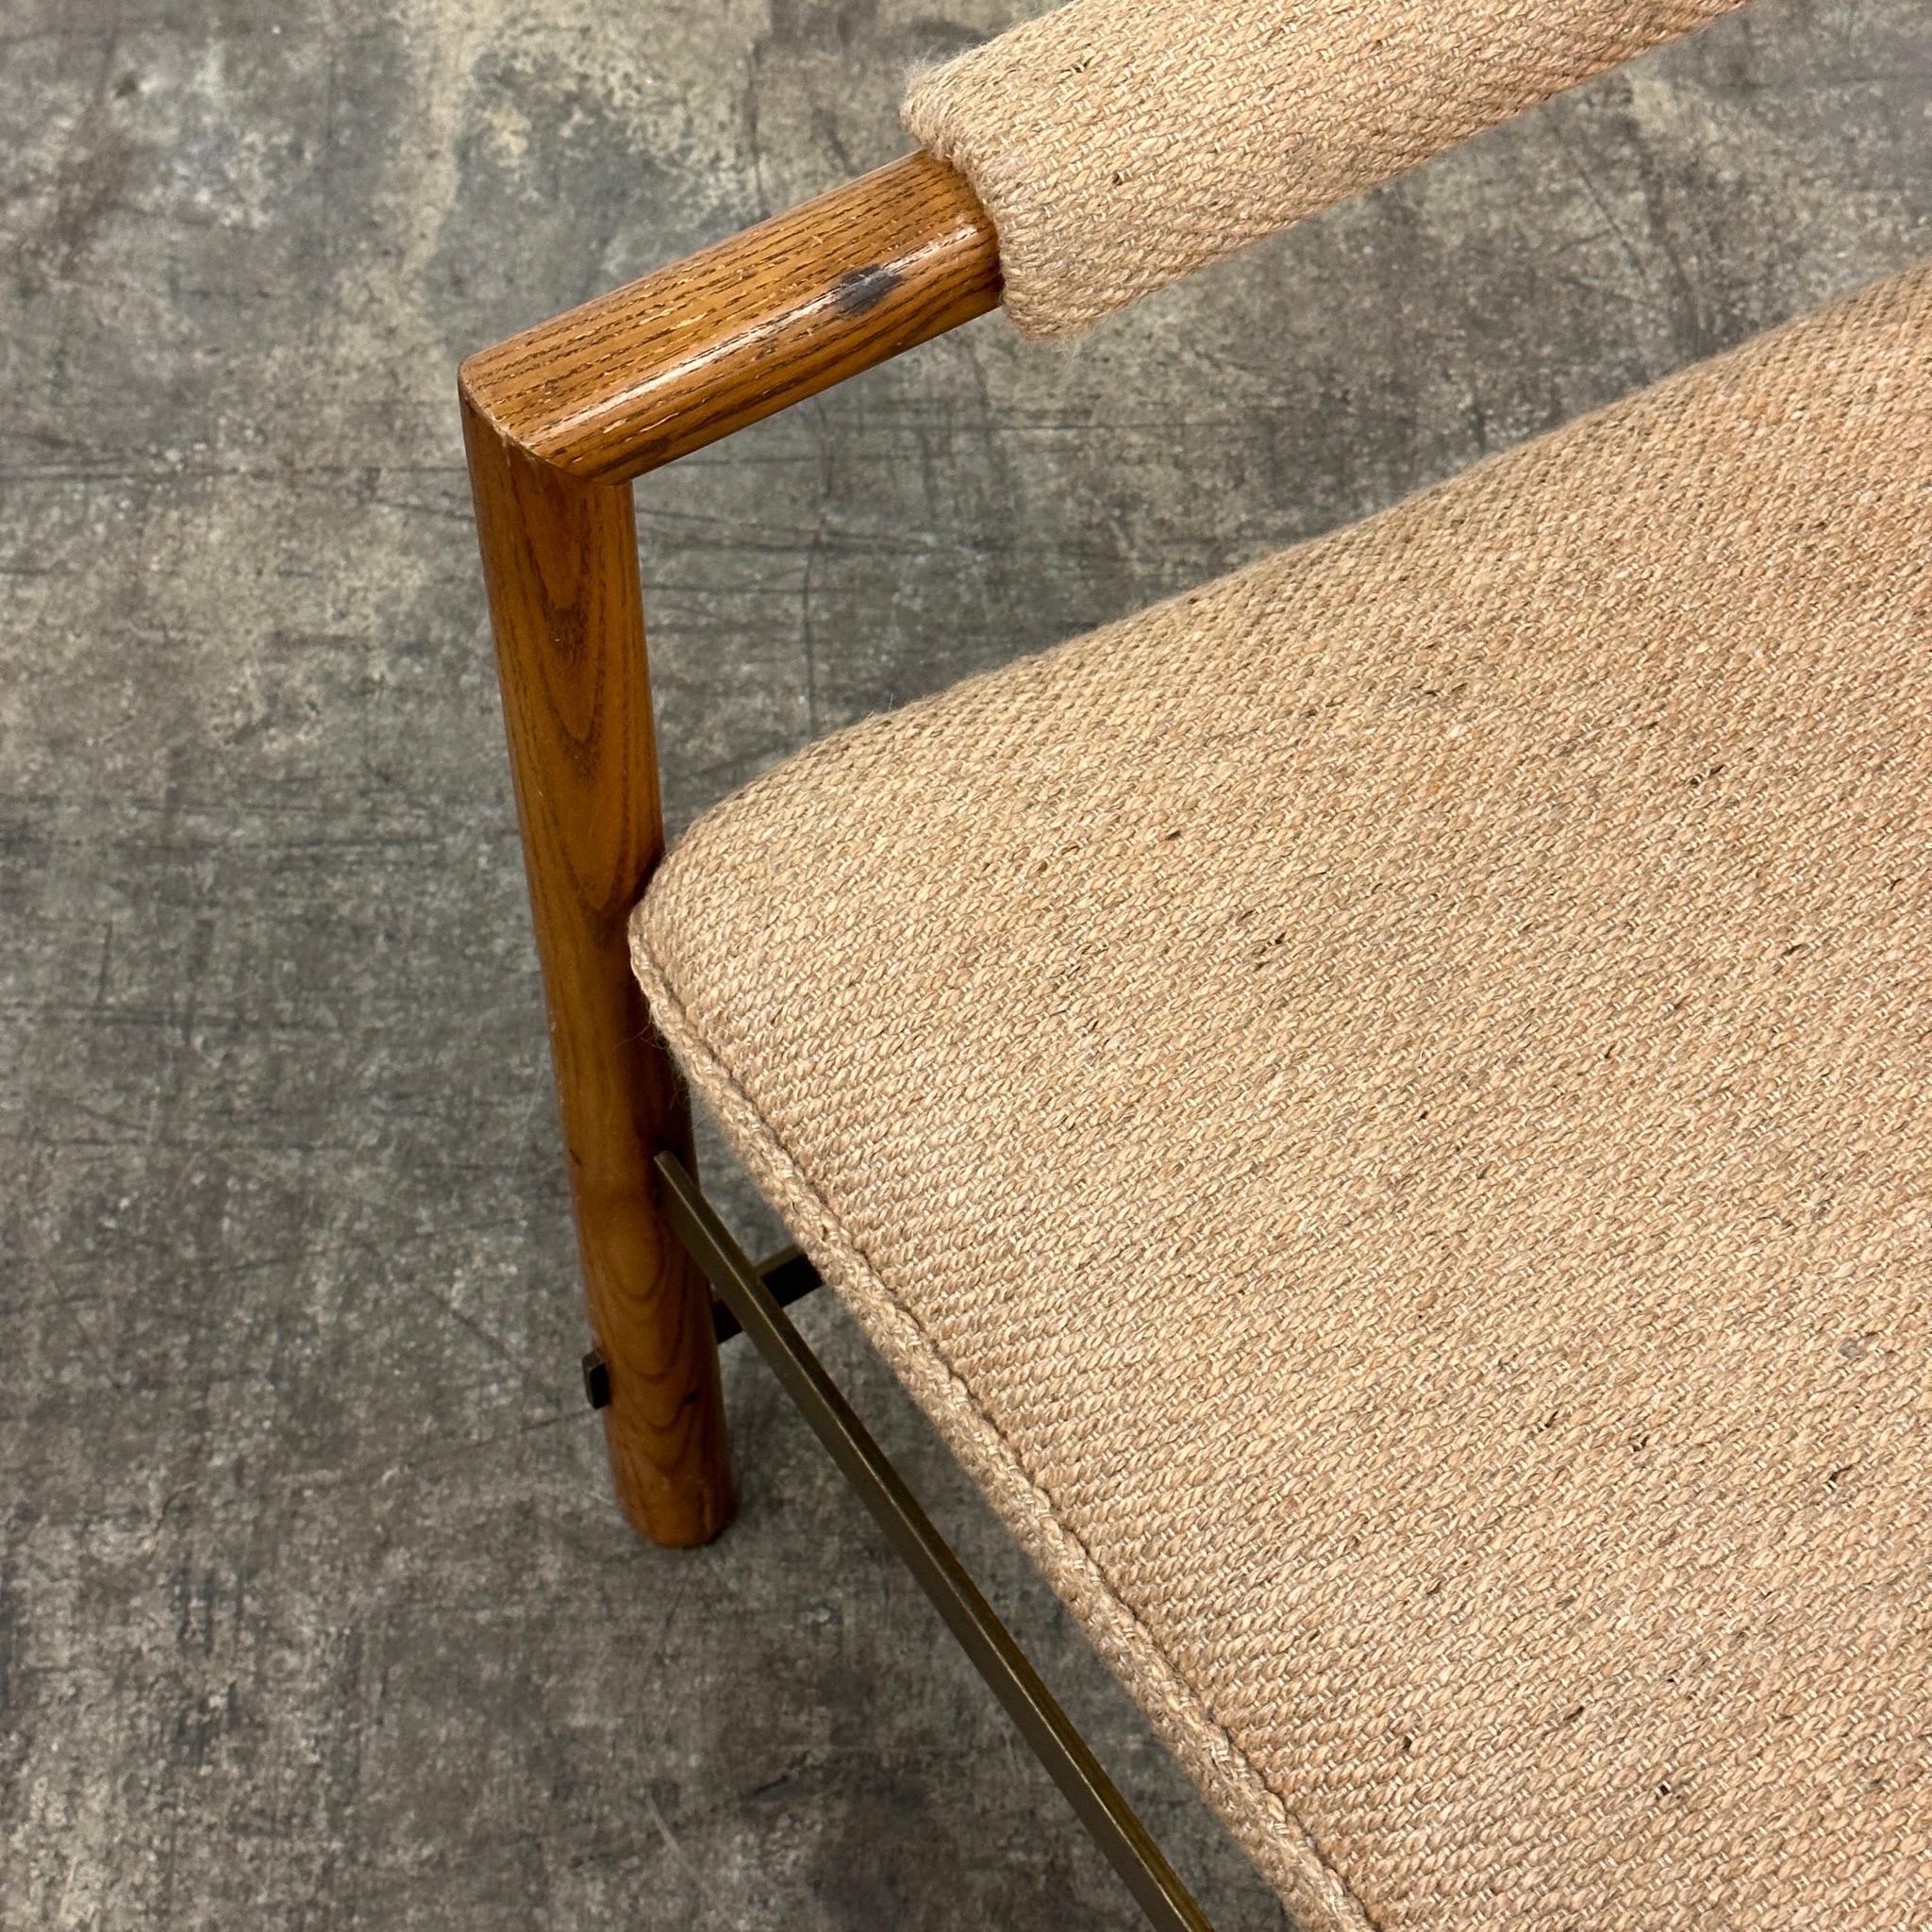 Vintage Ash Club Chair by Edward Wormley for Dunbar In Good Condition For Sale In Chicago, IL